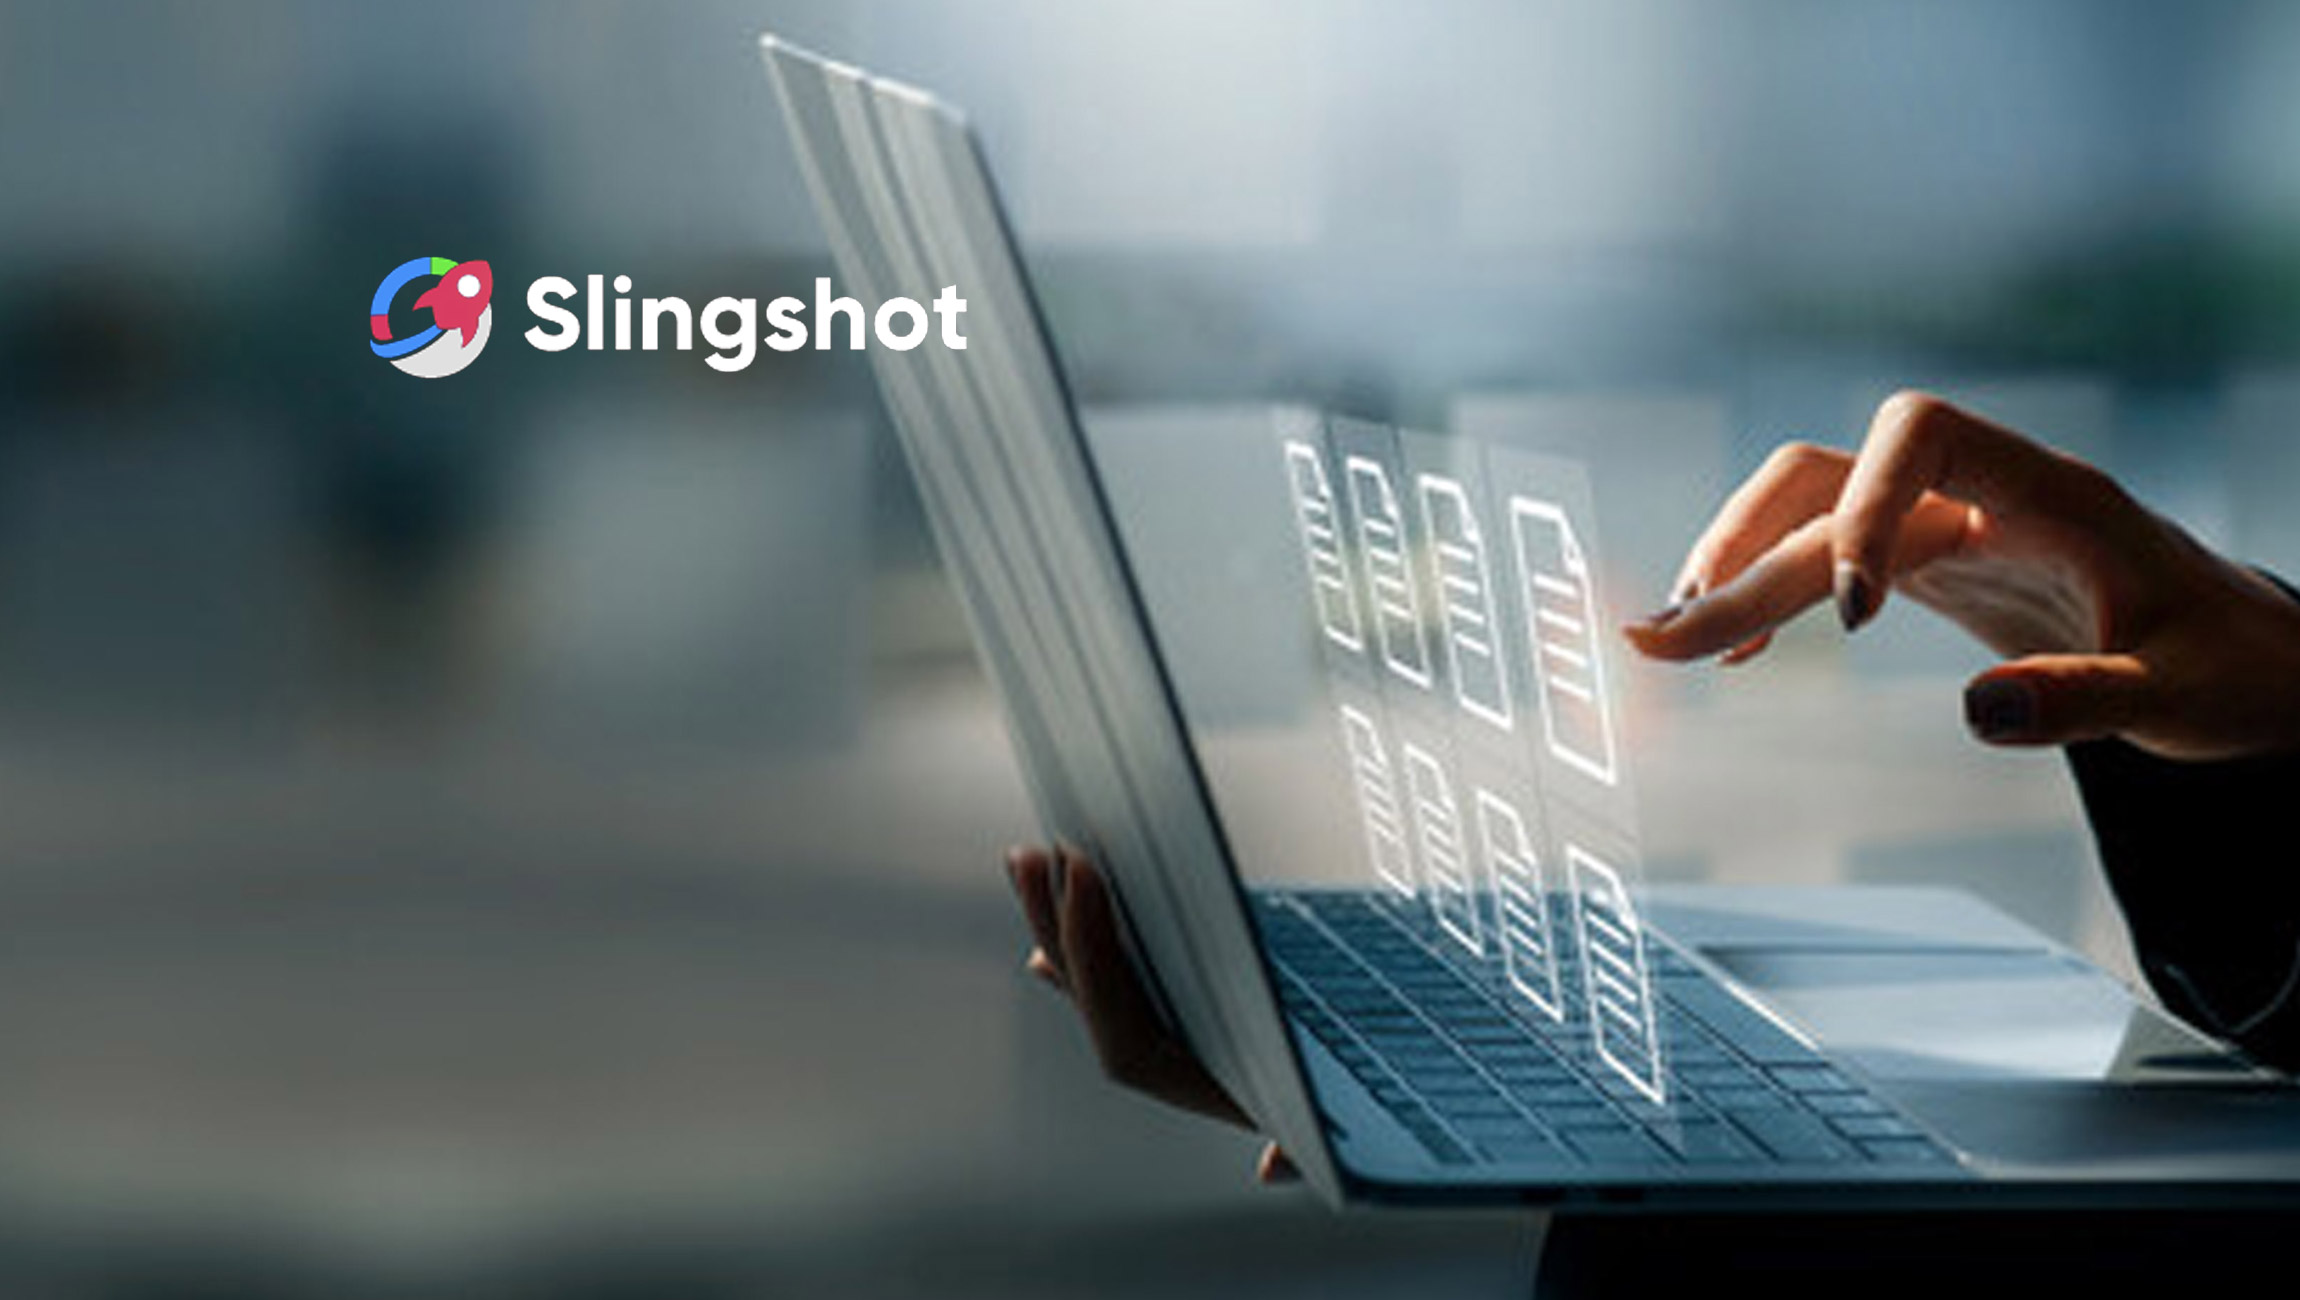 Introducing-Slingshot--The-Digital-Workplace-That-Connects-Everyone-You-Work-With-to-Everything-They-Need-to-Get-Work-Done